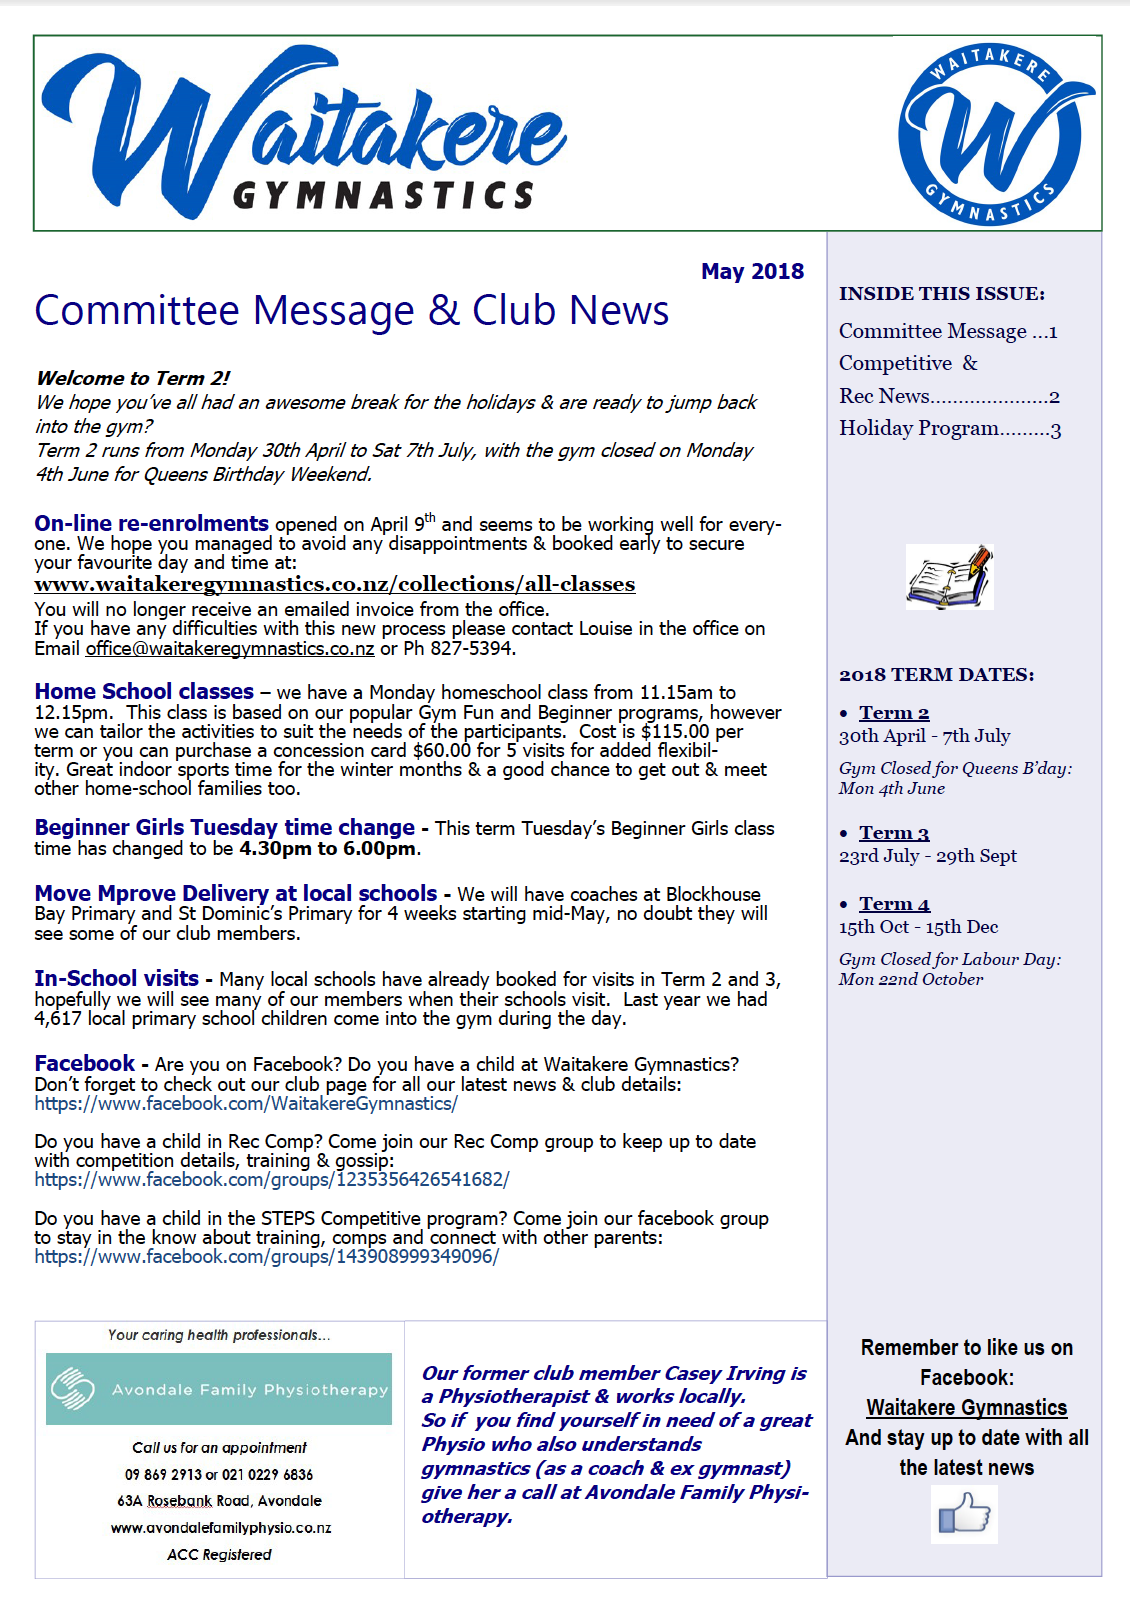 Club Newsletter - May 2018